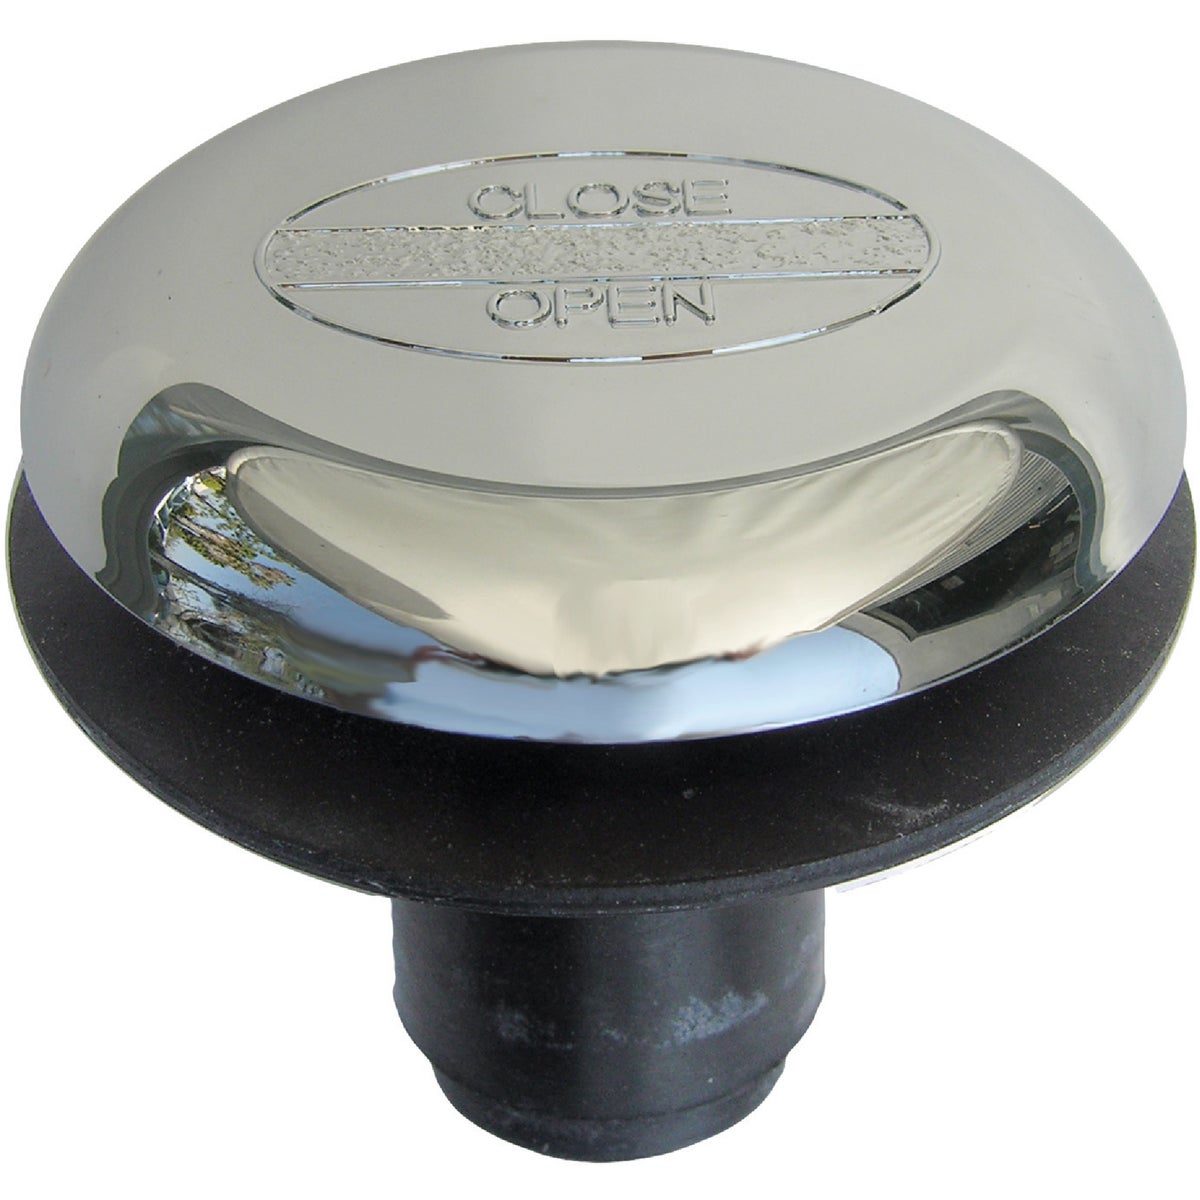 Lasco 3/8 In. x 1-3/4 In. Rapid Fit Tip Toe Bathtub Drain Stopper with Chrome Plated Finish